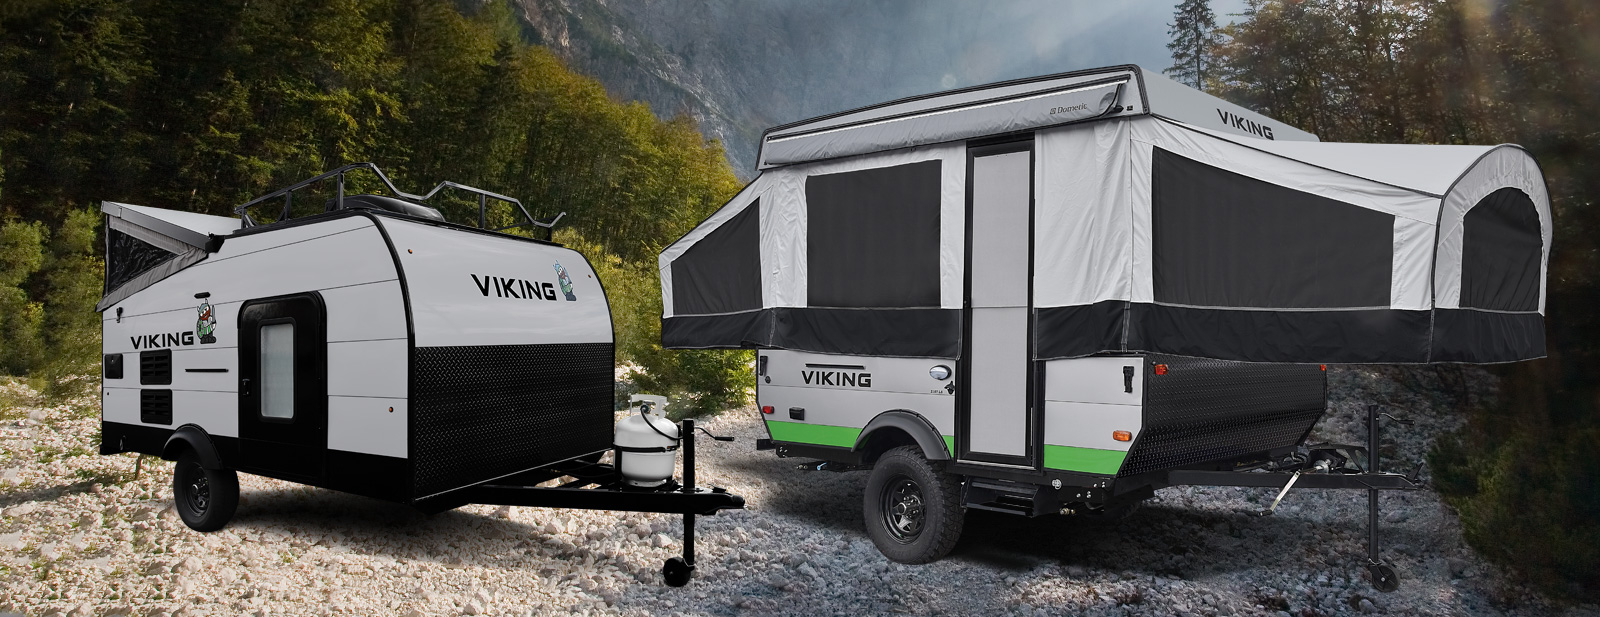 two parked viking campers